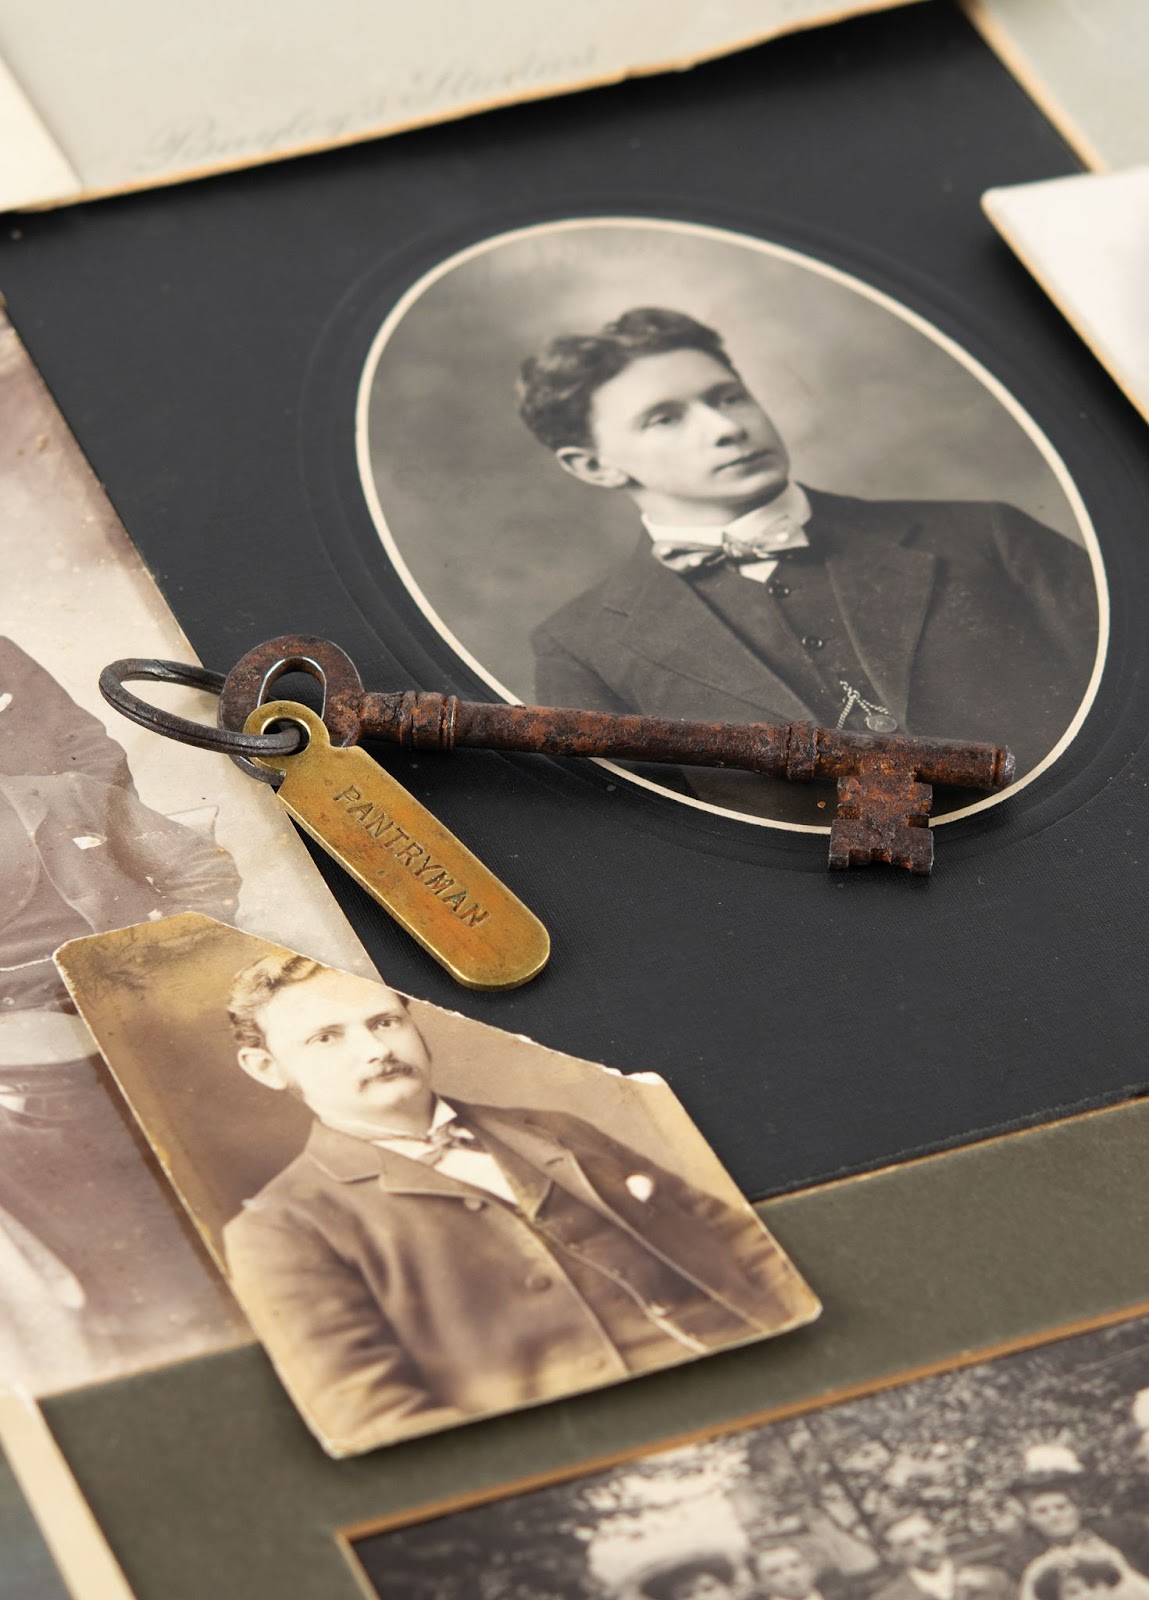 The “Pantryman” key found on the body of Titanic saloon steward Alfred Arnold Deeble, accompanied by early 20th-century photographs of him.